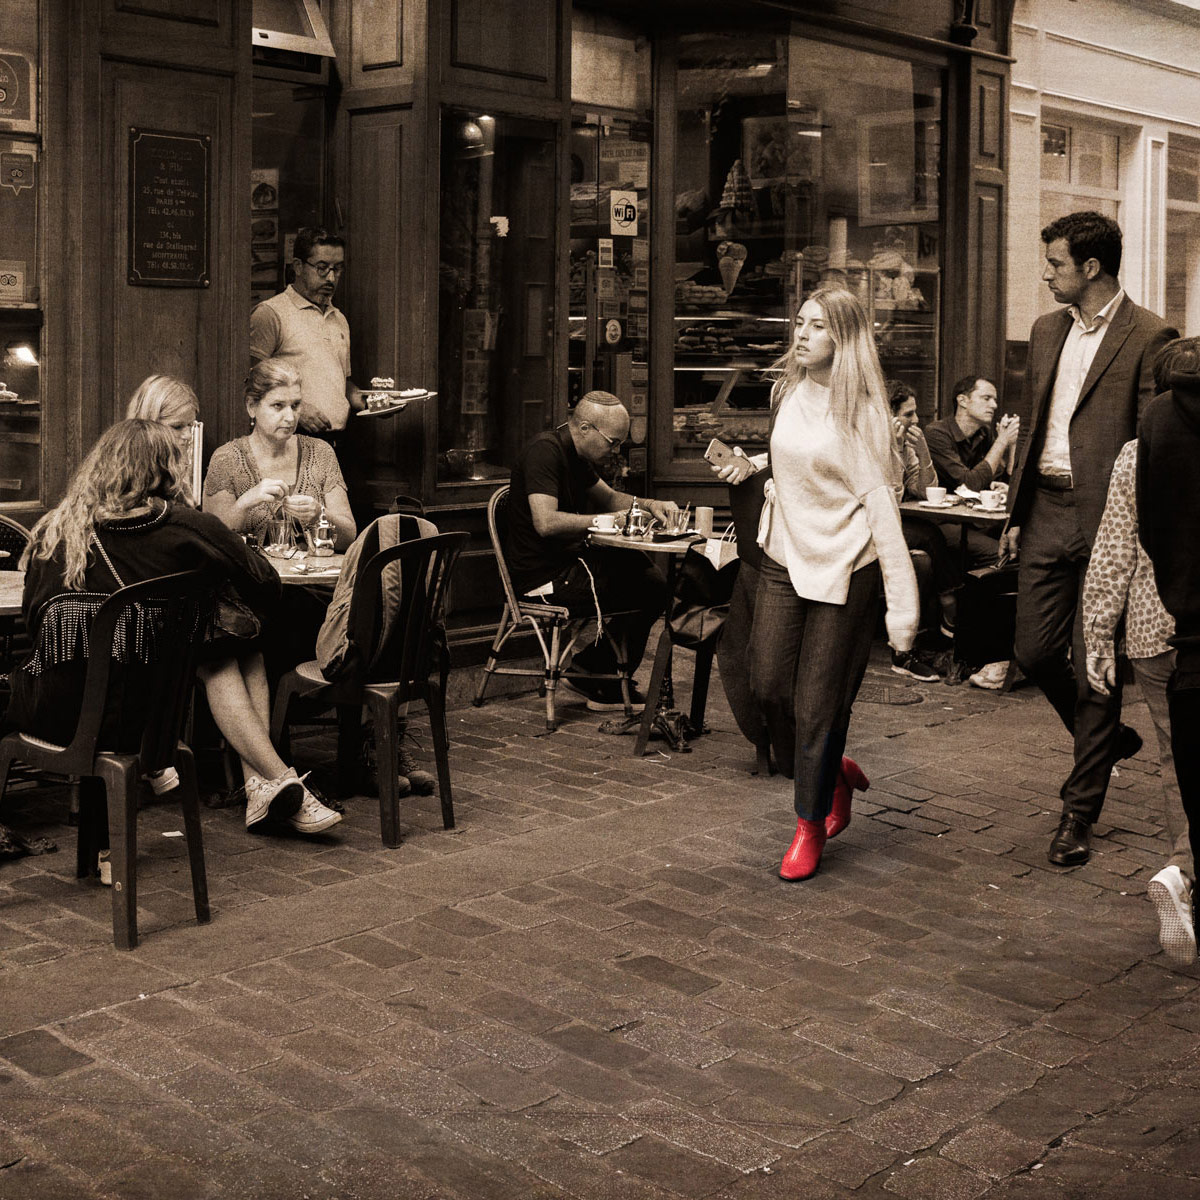 The Girl With The Red Boots, Murait District, Paris France